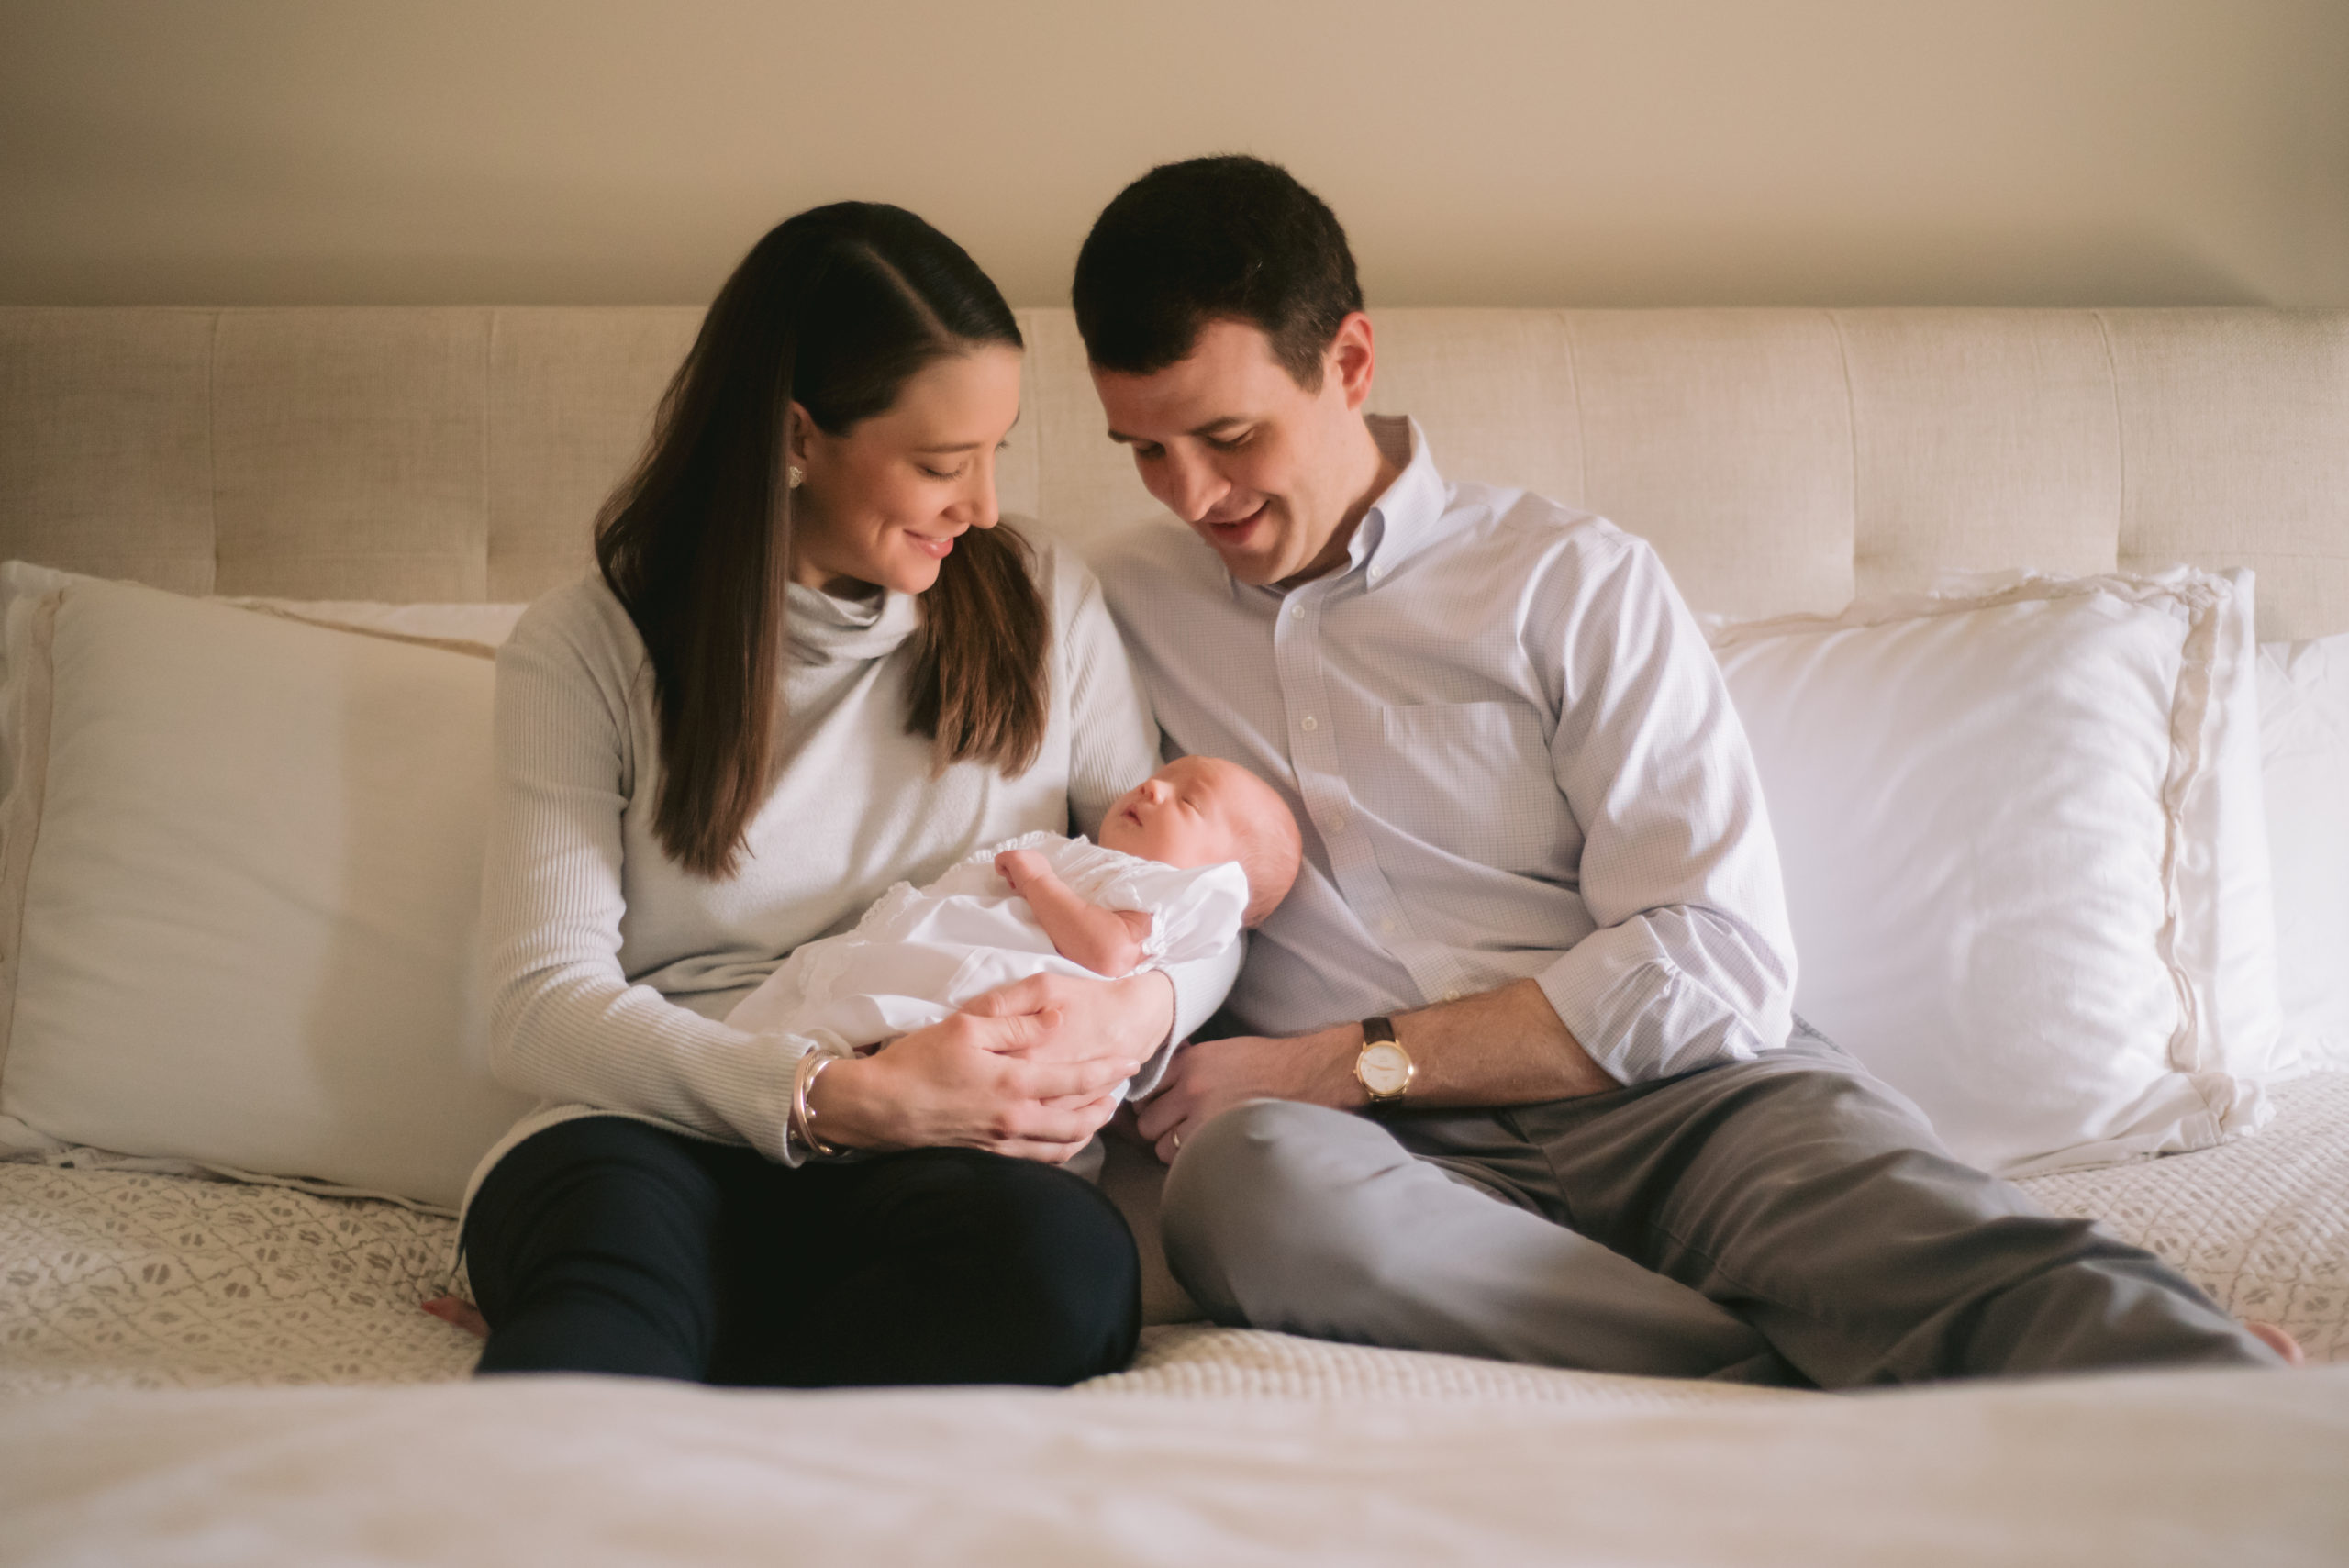 New Orleans Family Photographer Jacqueline Dallimore